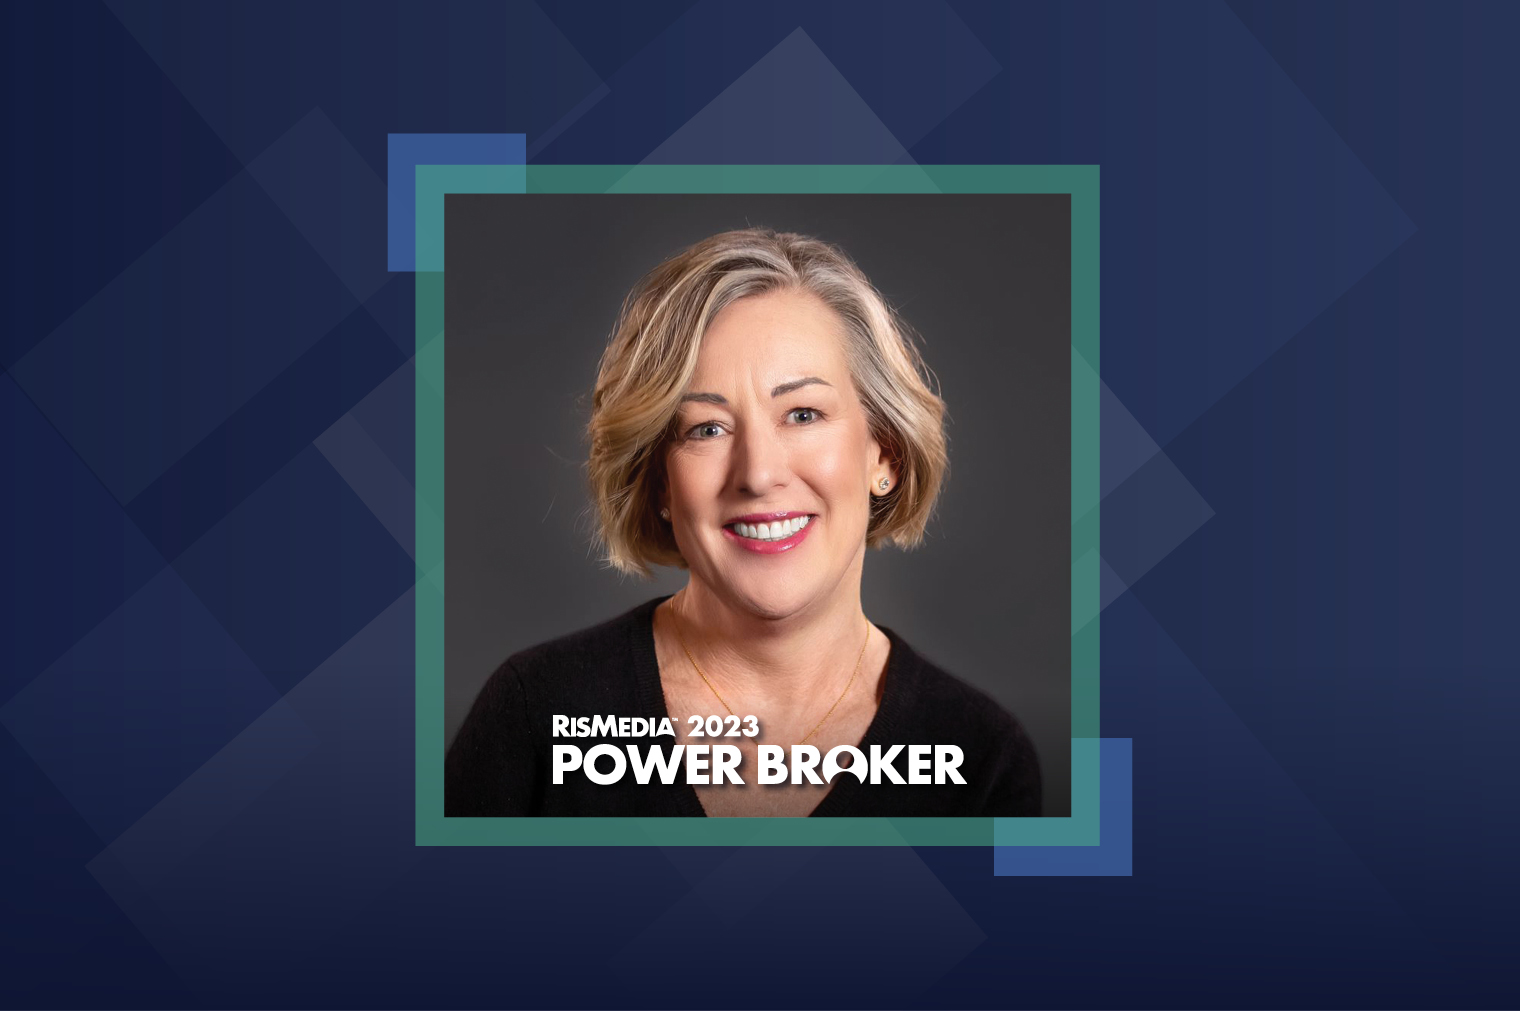 The Power Broker Interview: Sue Yannaccone Discusses ‘Bigger Picture’ Goals for Success in Any Market